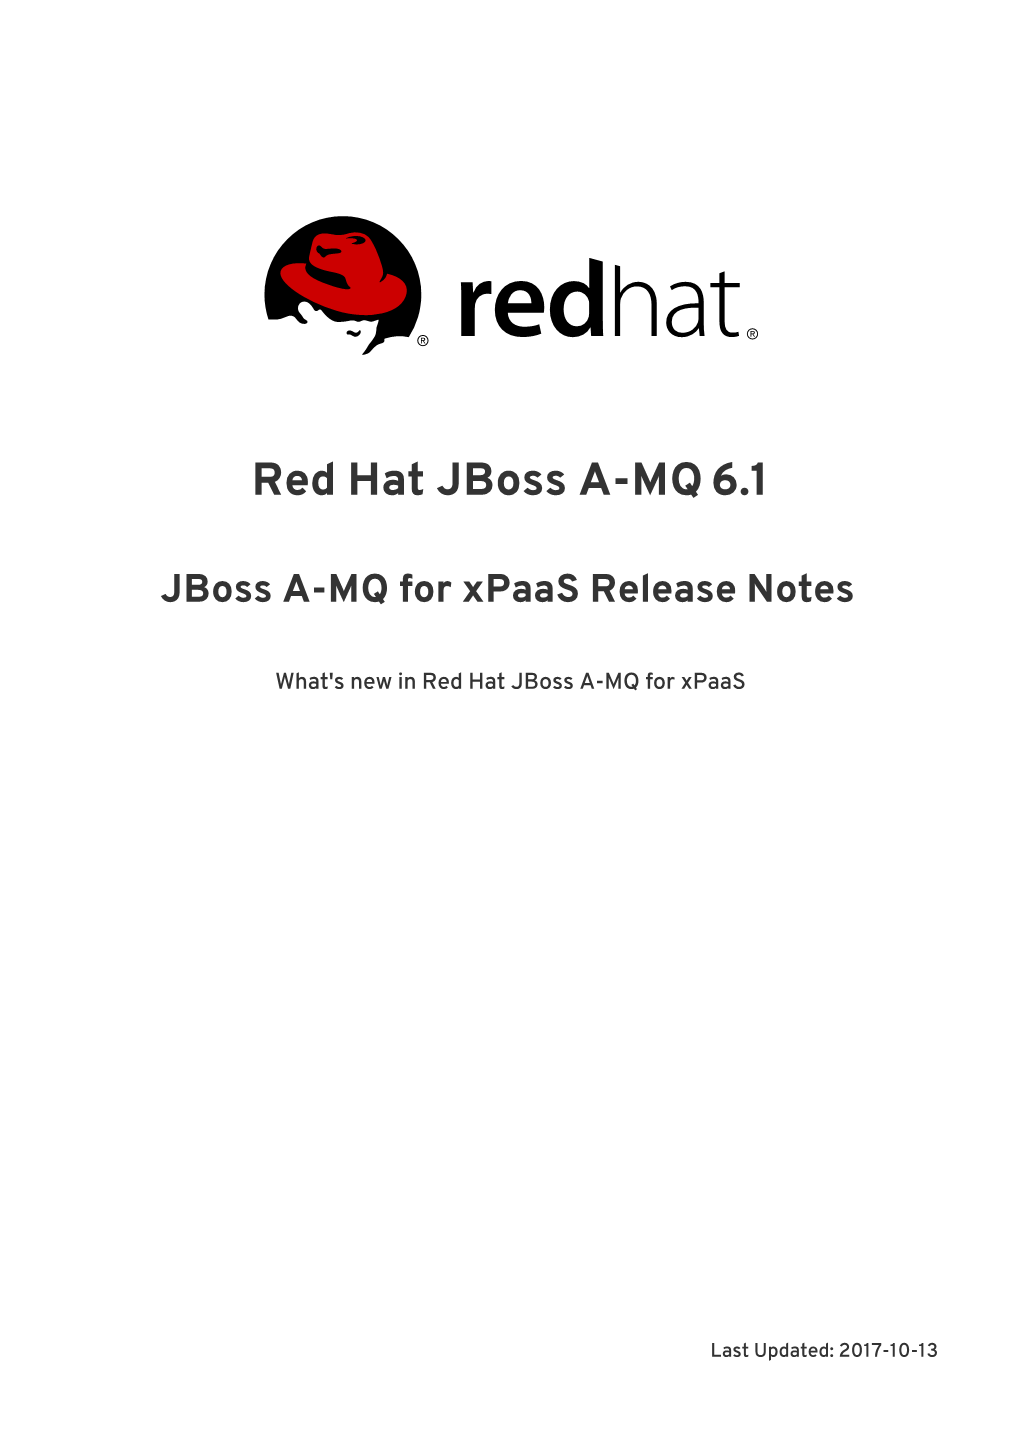 Red Hat AMQ 6.1 Jboss A-MQ for Xpaas Release Notes